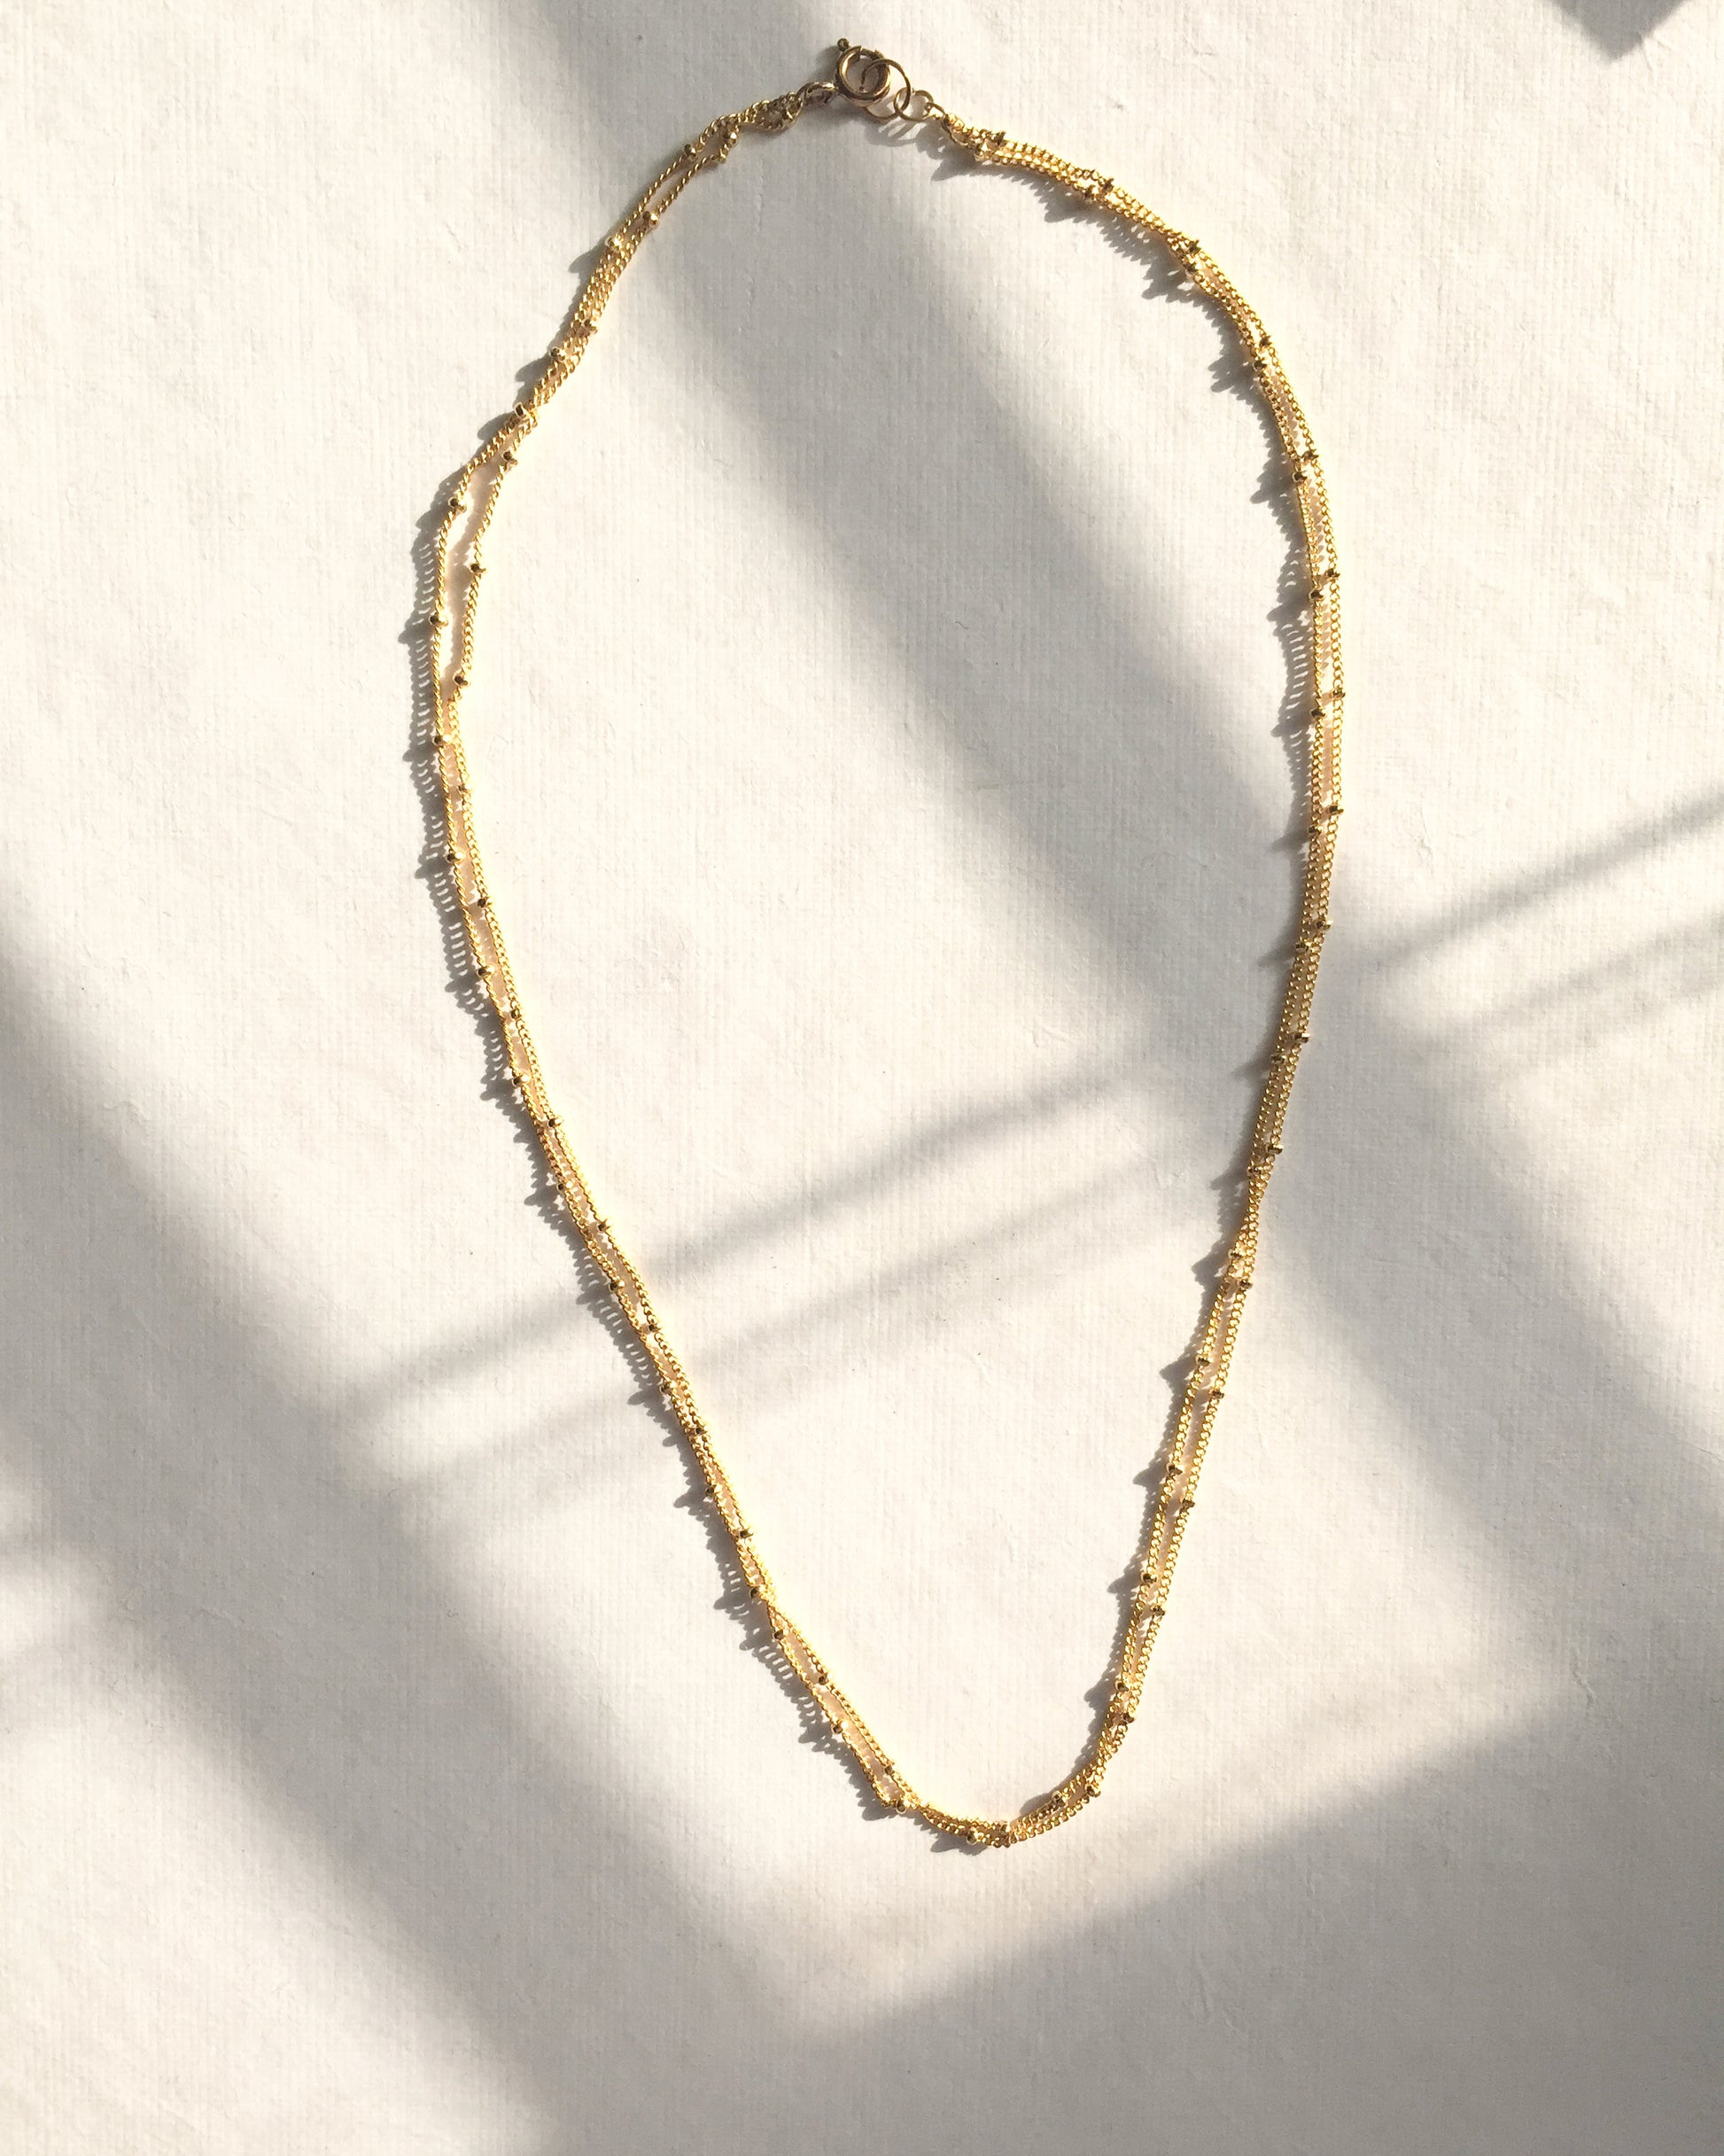 Delicate Double Strand Necklace | Small Dainty Necklace in Gold Filled or Sterling Silver | IB Jewelry